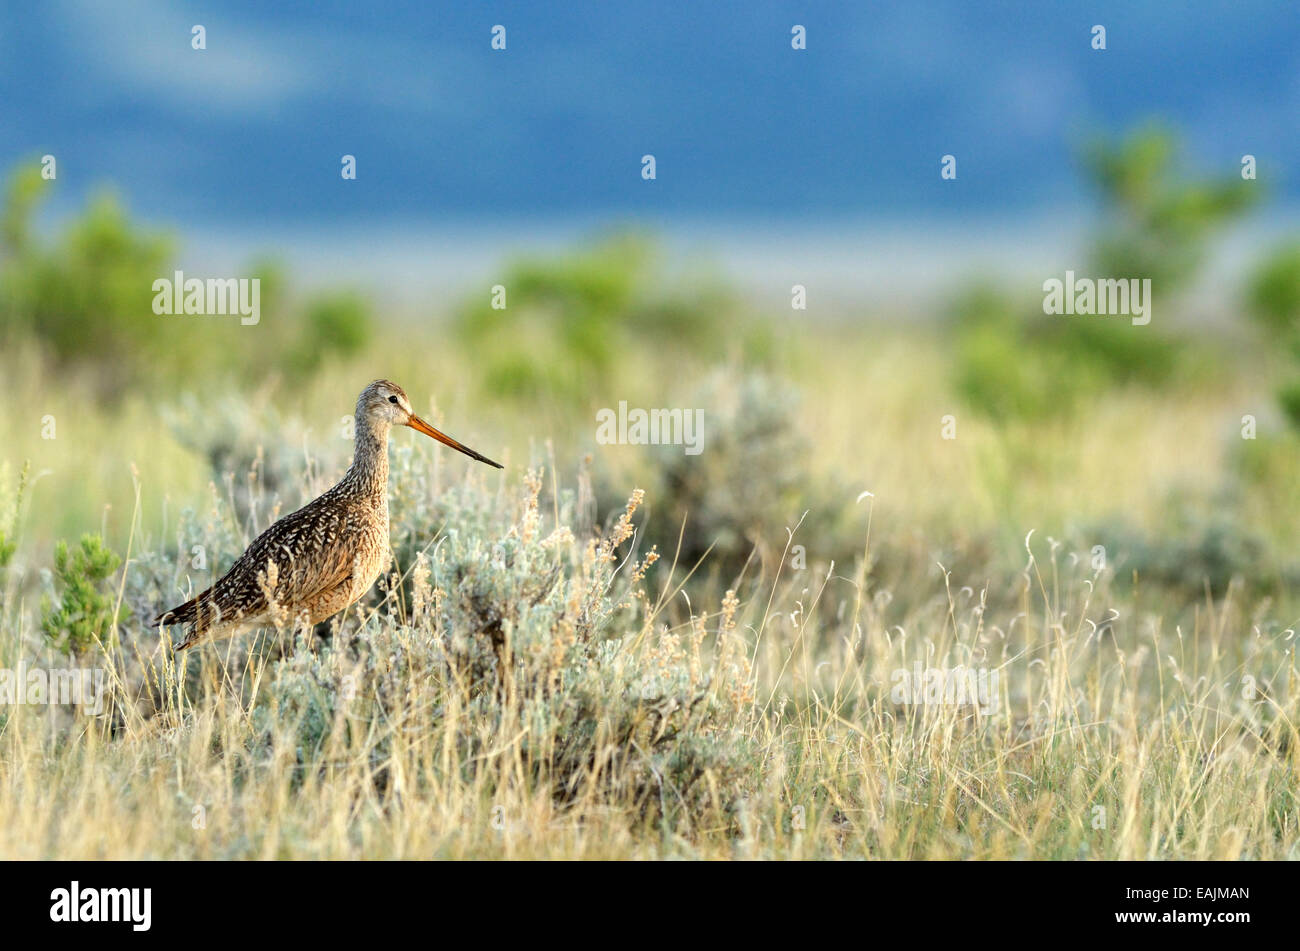 Marbled Godwit on the northern plains of Montana. Charles M. Russell National Wildlife Refuge, American Prairie Reserve region. Stock Photo